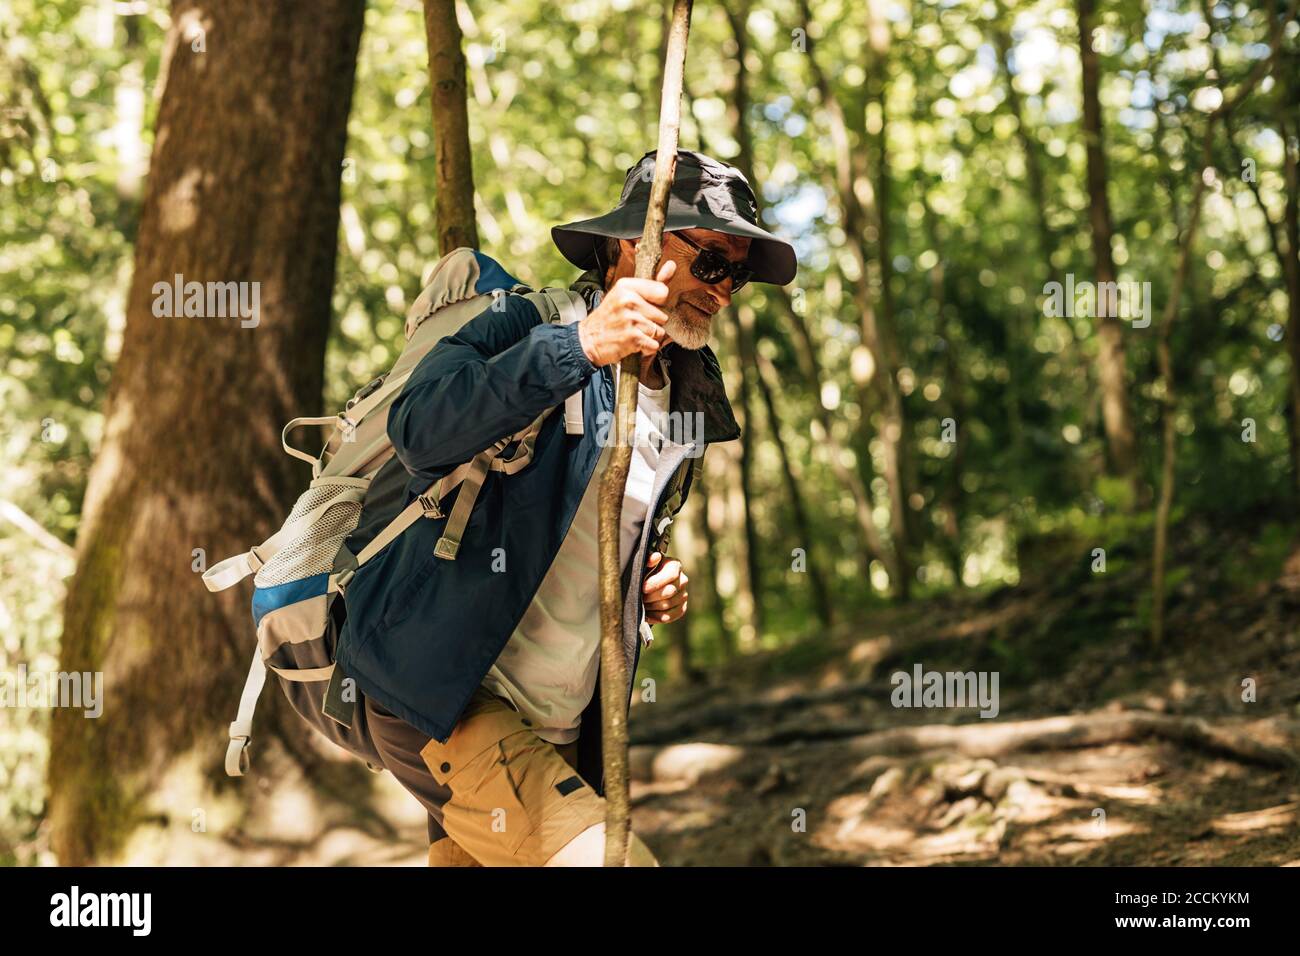 Side view of mature man with backpack walking through trees on a trail. Male backpacker hiking through trees using a stick. Stock Photo